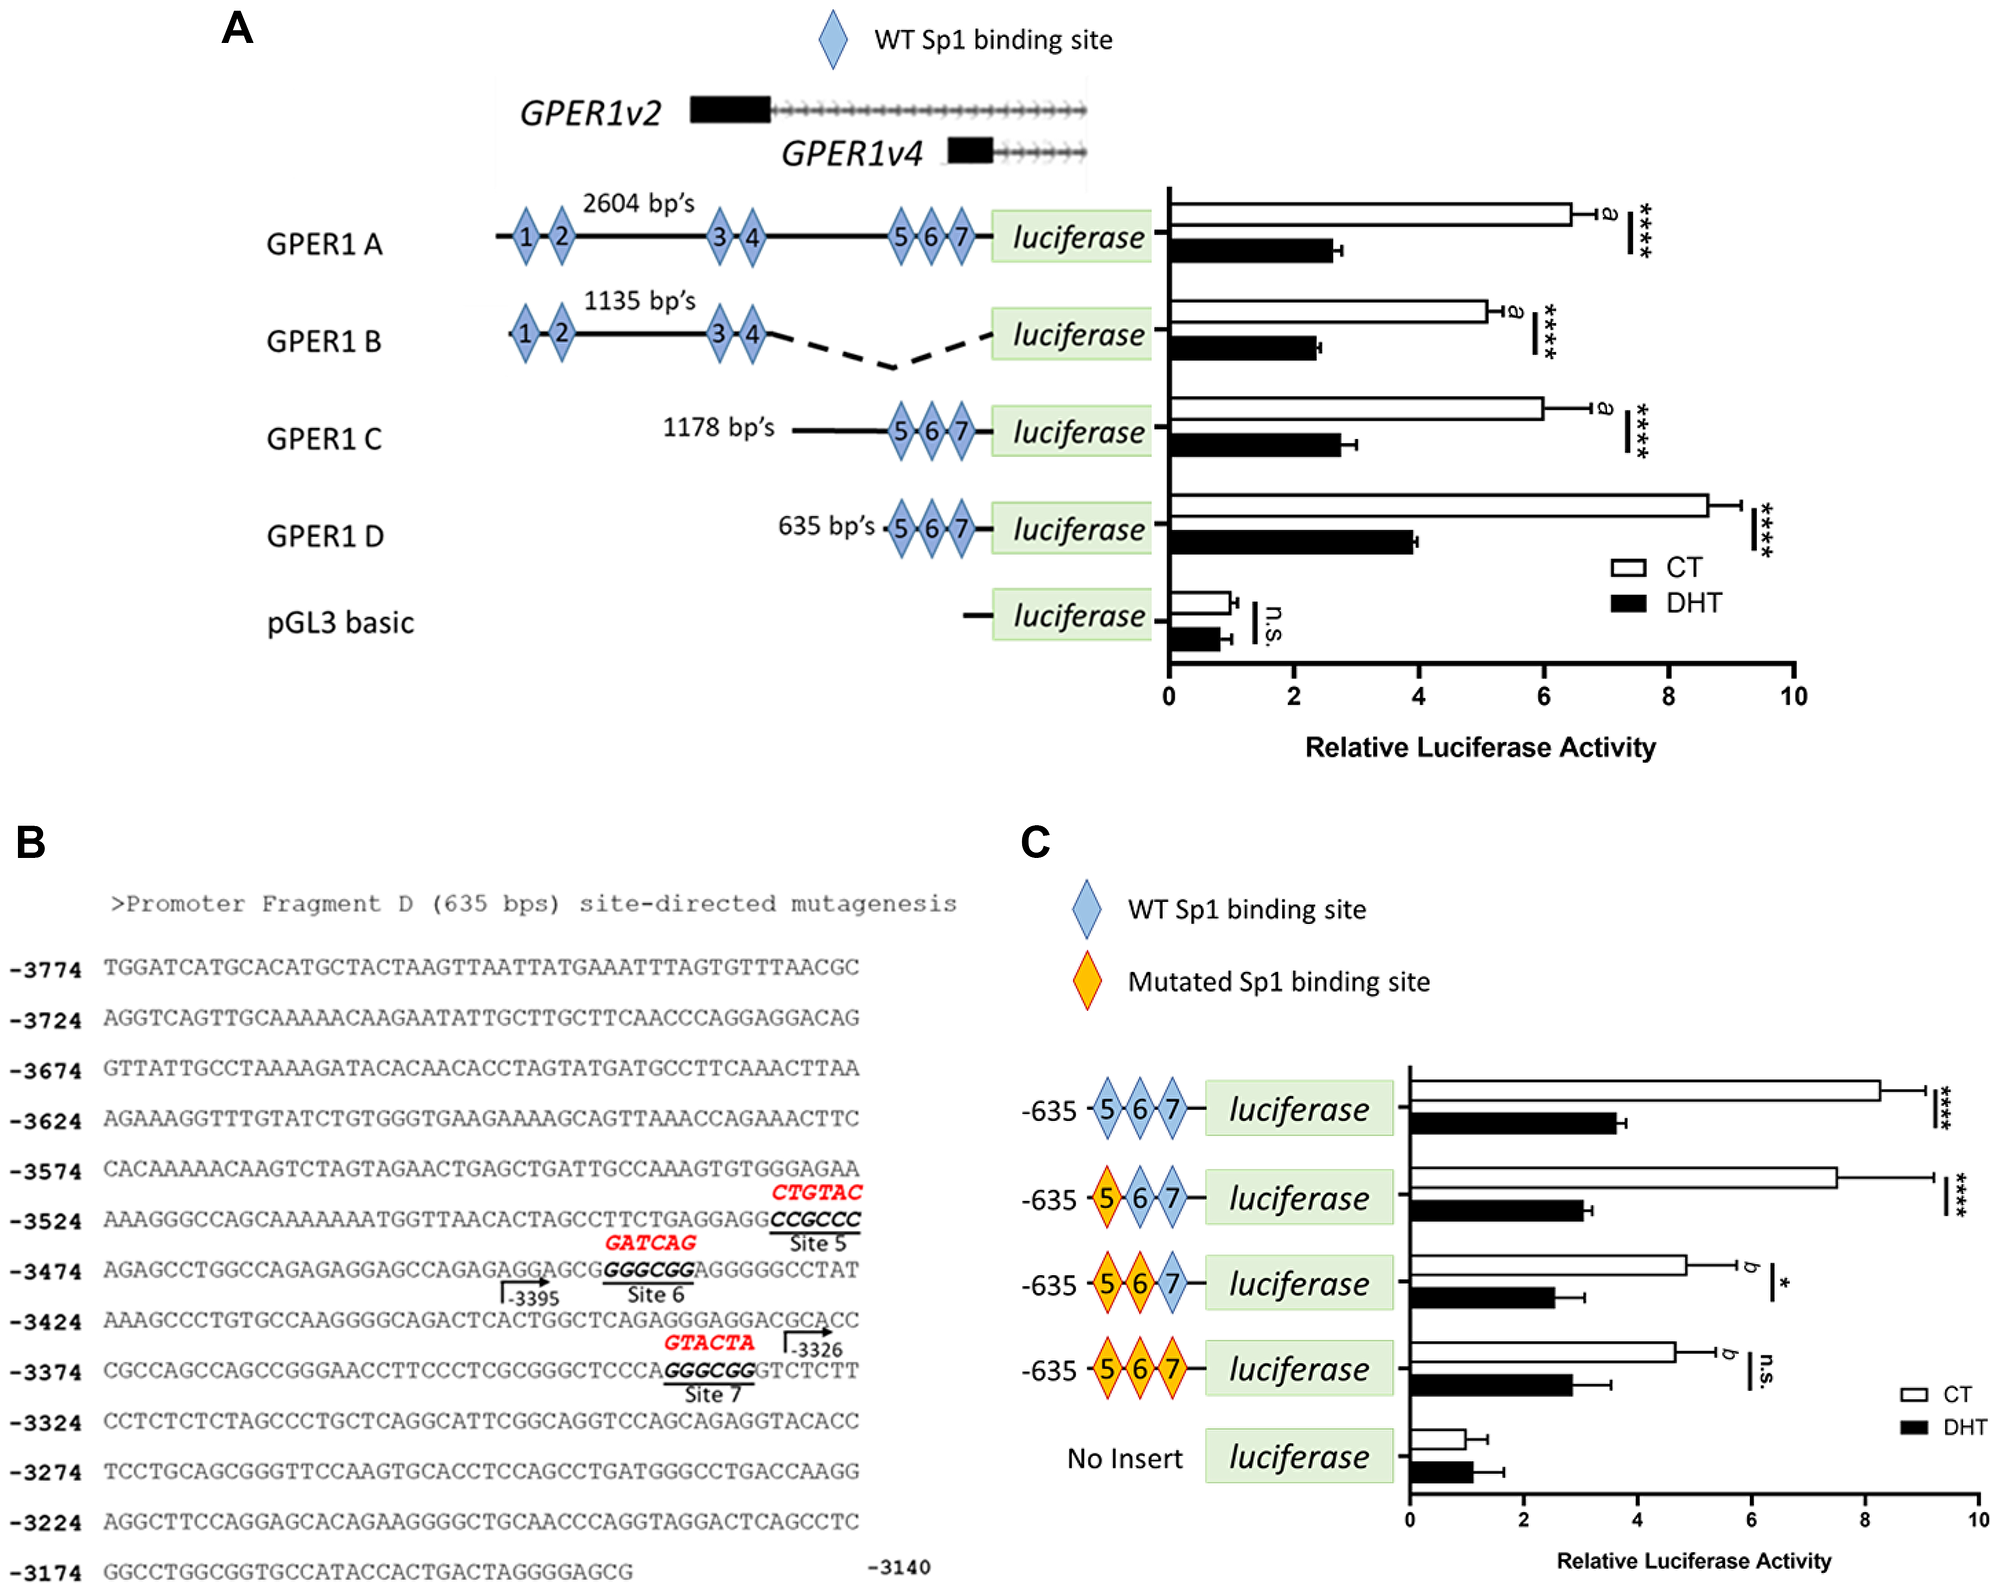 GPER1v2 and GPER1v4 promoters are repressed by androgens and deletion of predicated Sp1/Sp3 consensus sequences reduces basal expression in the GPER1v4 promoter.